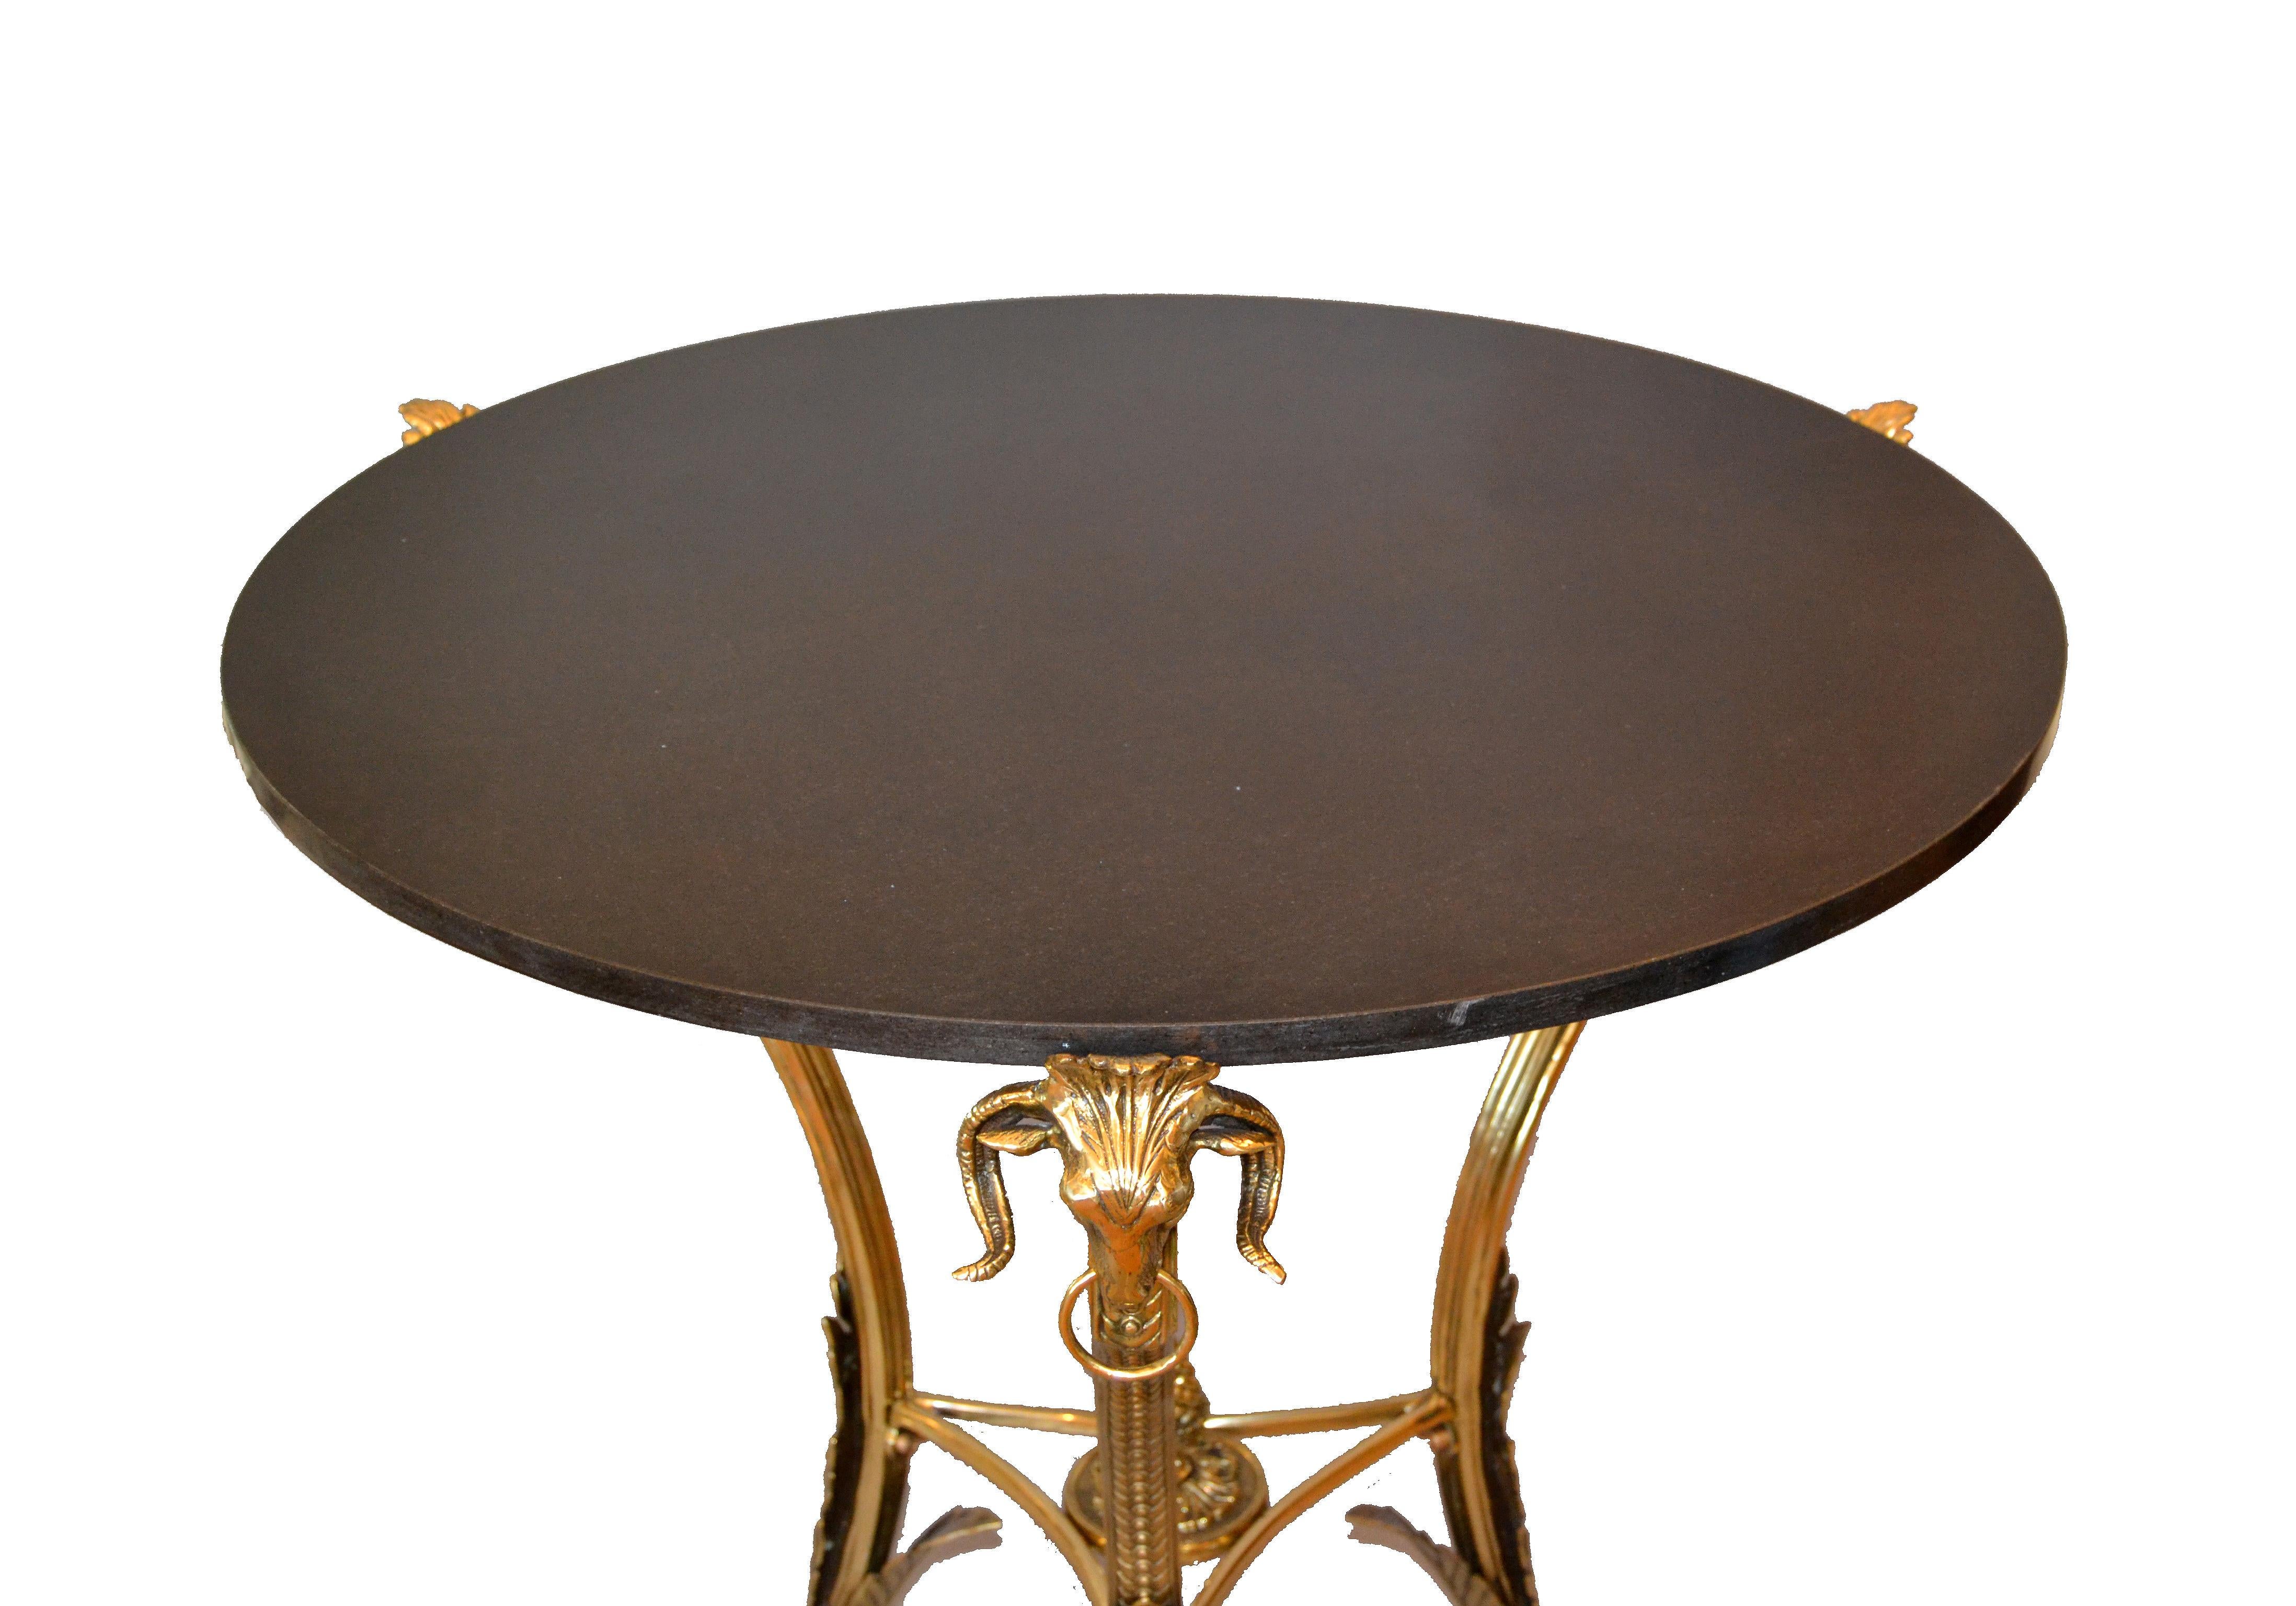 French Round Bronze Gueridon Style Table Rams Heads and Feet with Granite Top For Sale 4